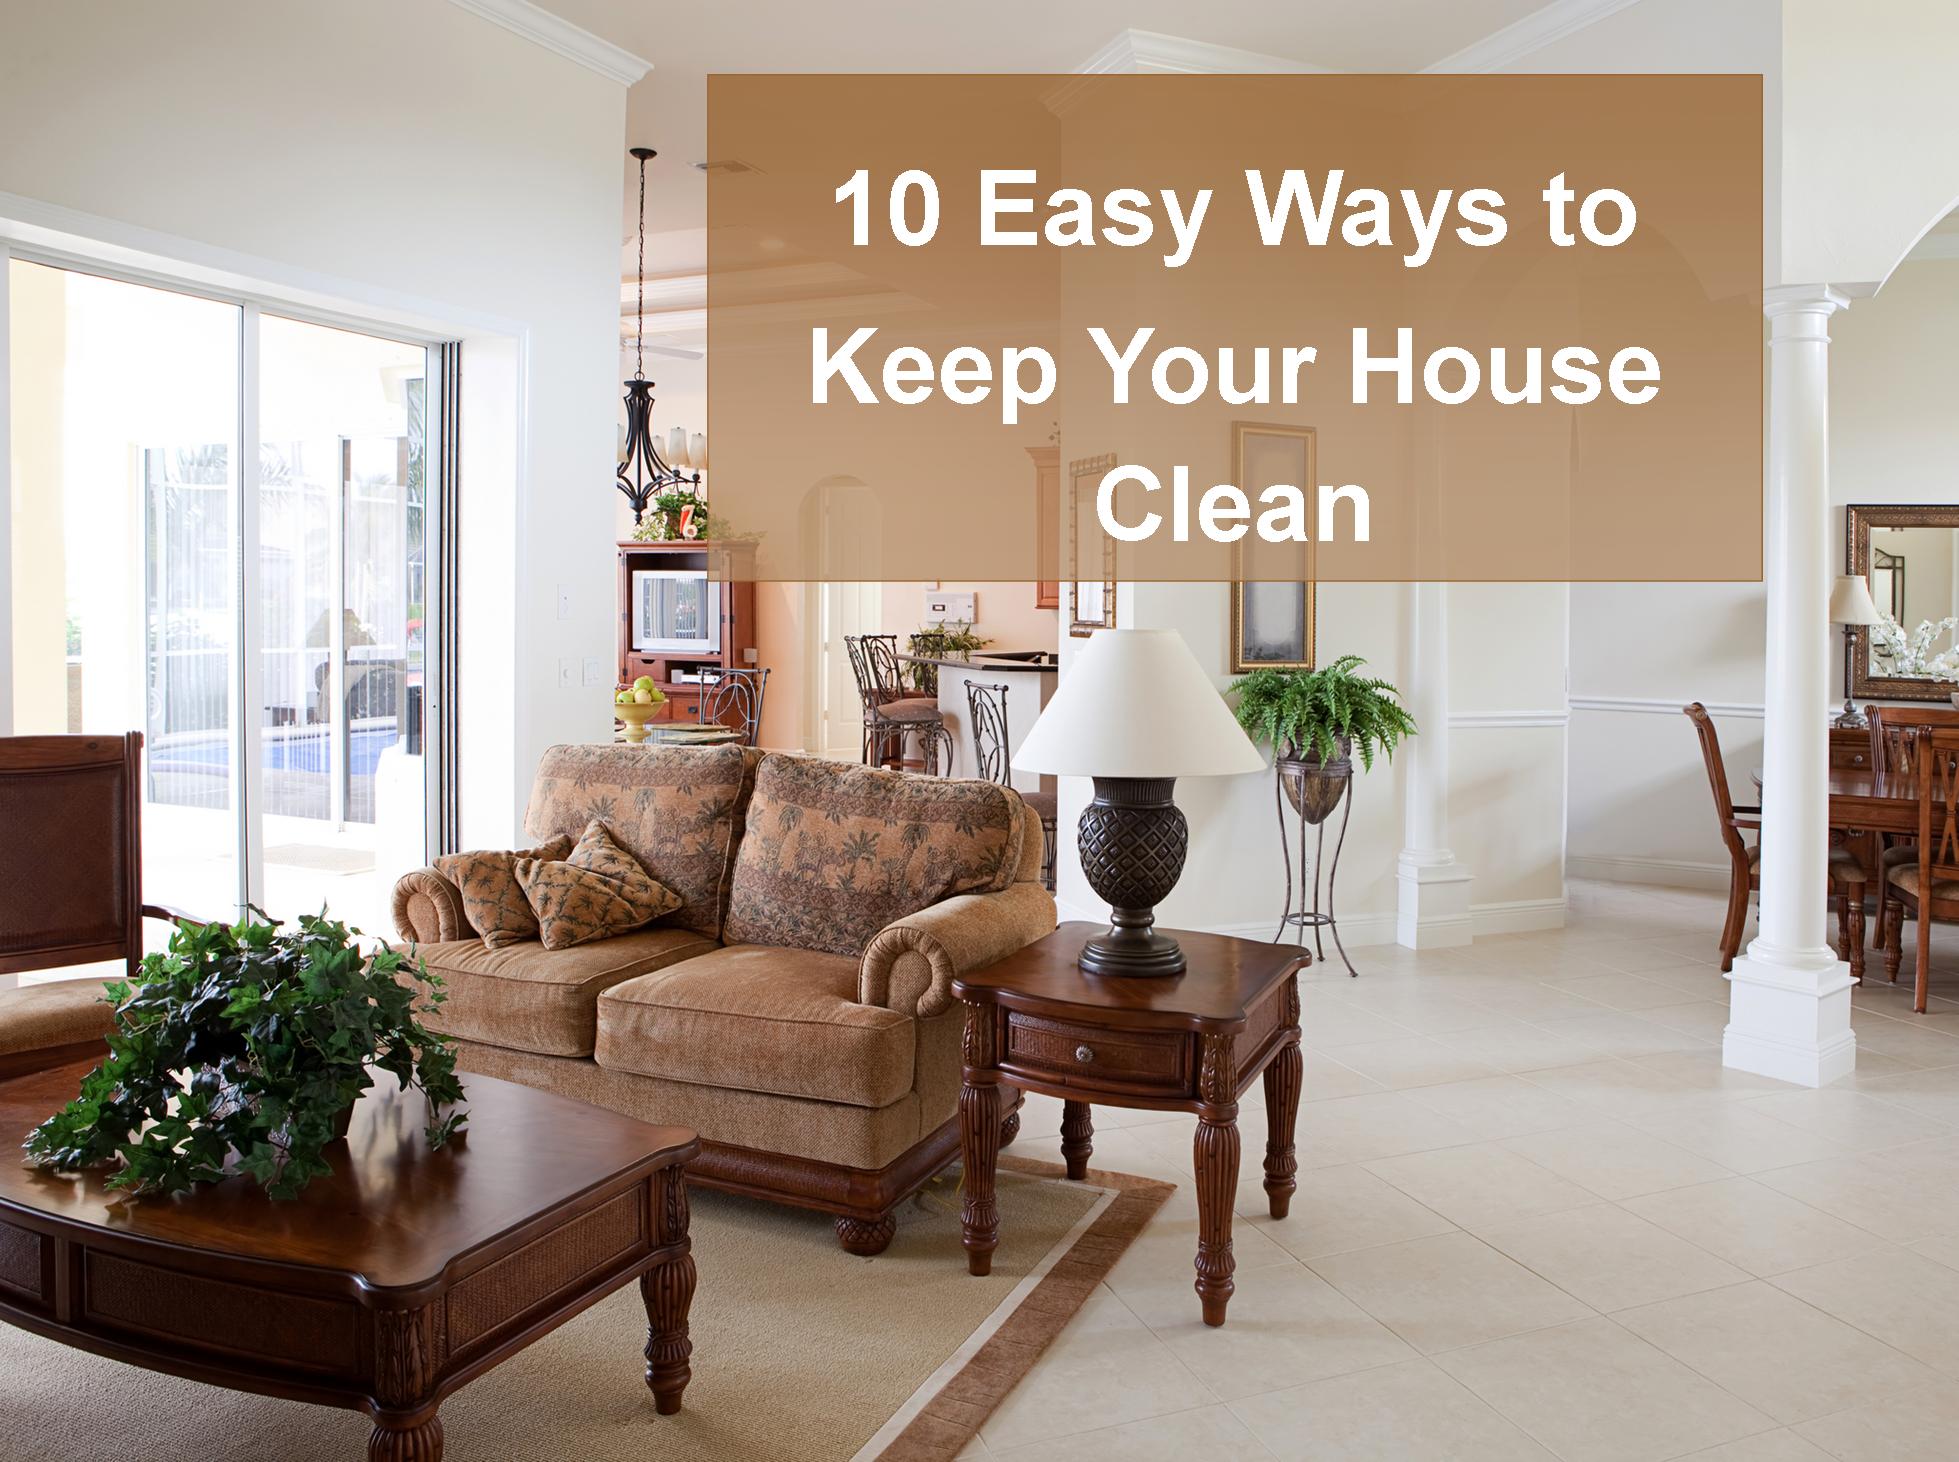 10 Easy Ways to Keep Your House Clean. Keep reading for the easiest home cleaning hacks ever, and the order in which to keep your house clean!